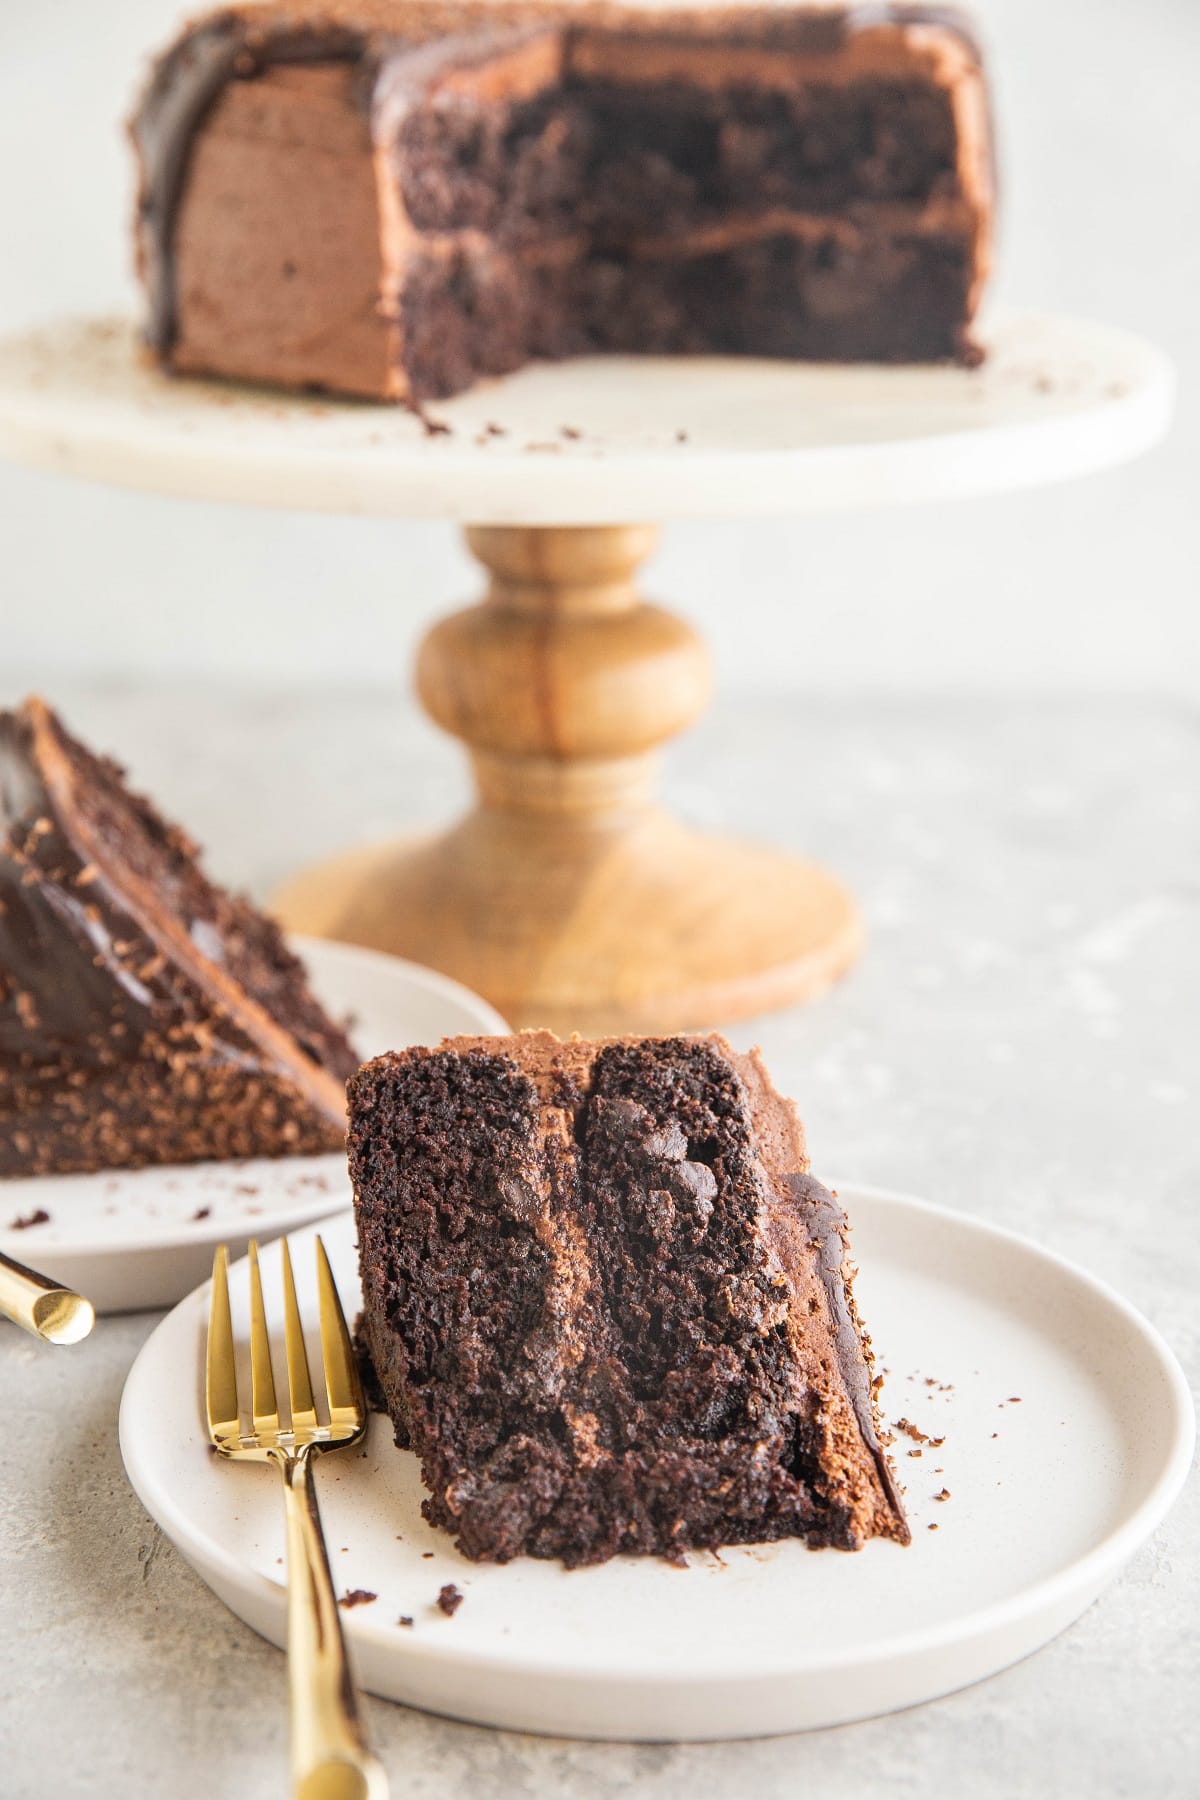 Insanely rich and delicious gluten-free chocolate cake made with no dairy or refined sugar